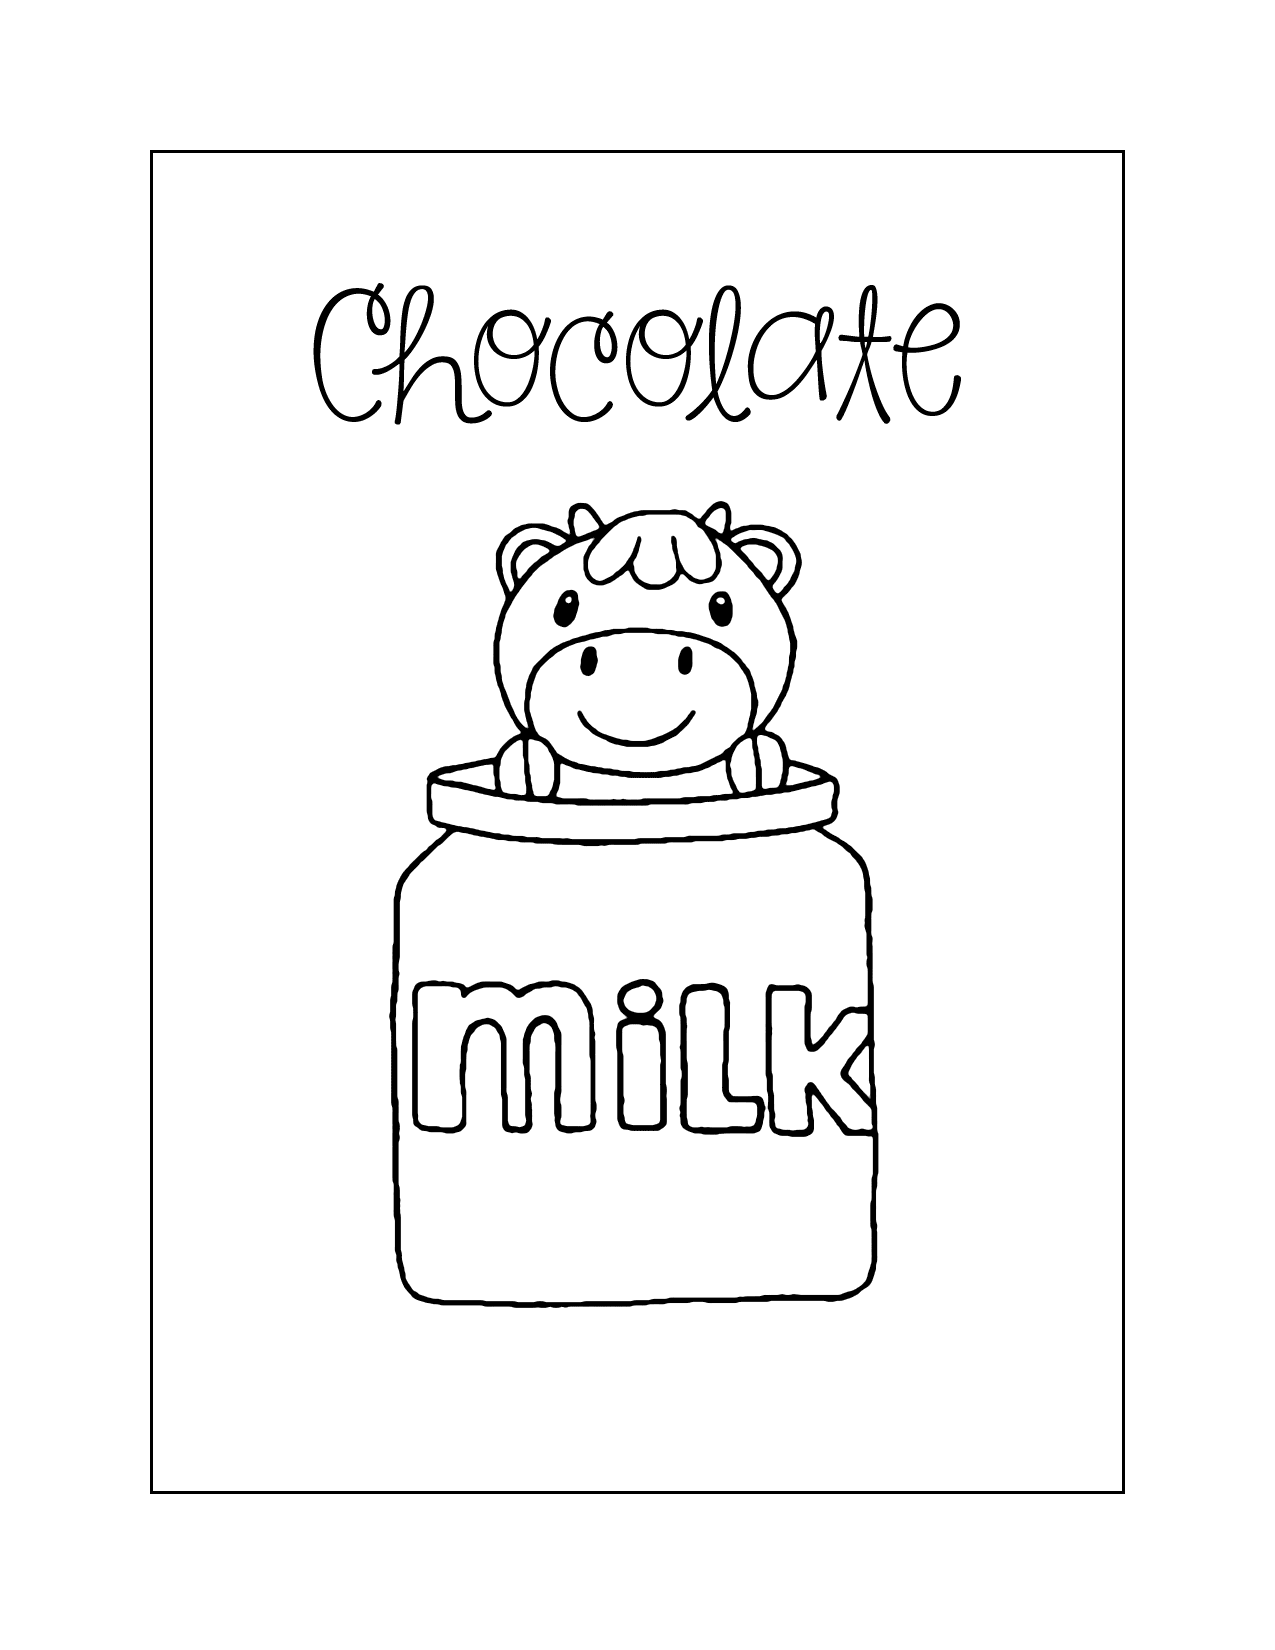 Chocolate Milk Coloring Page